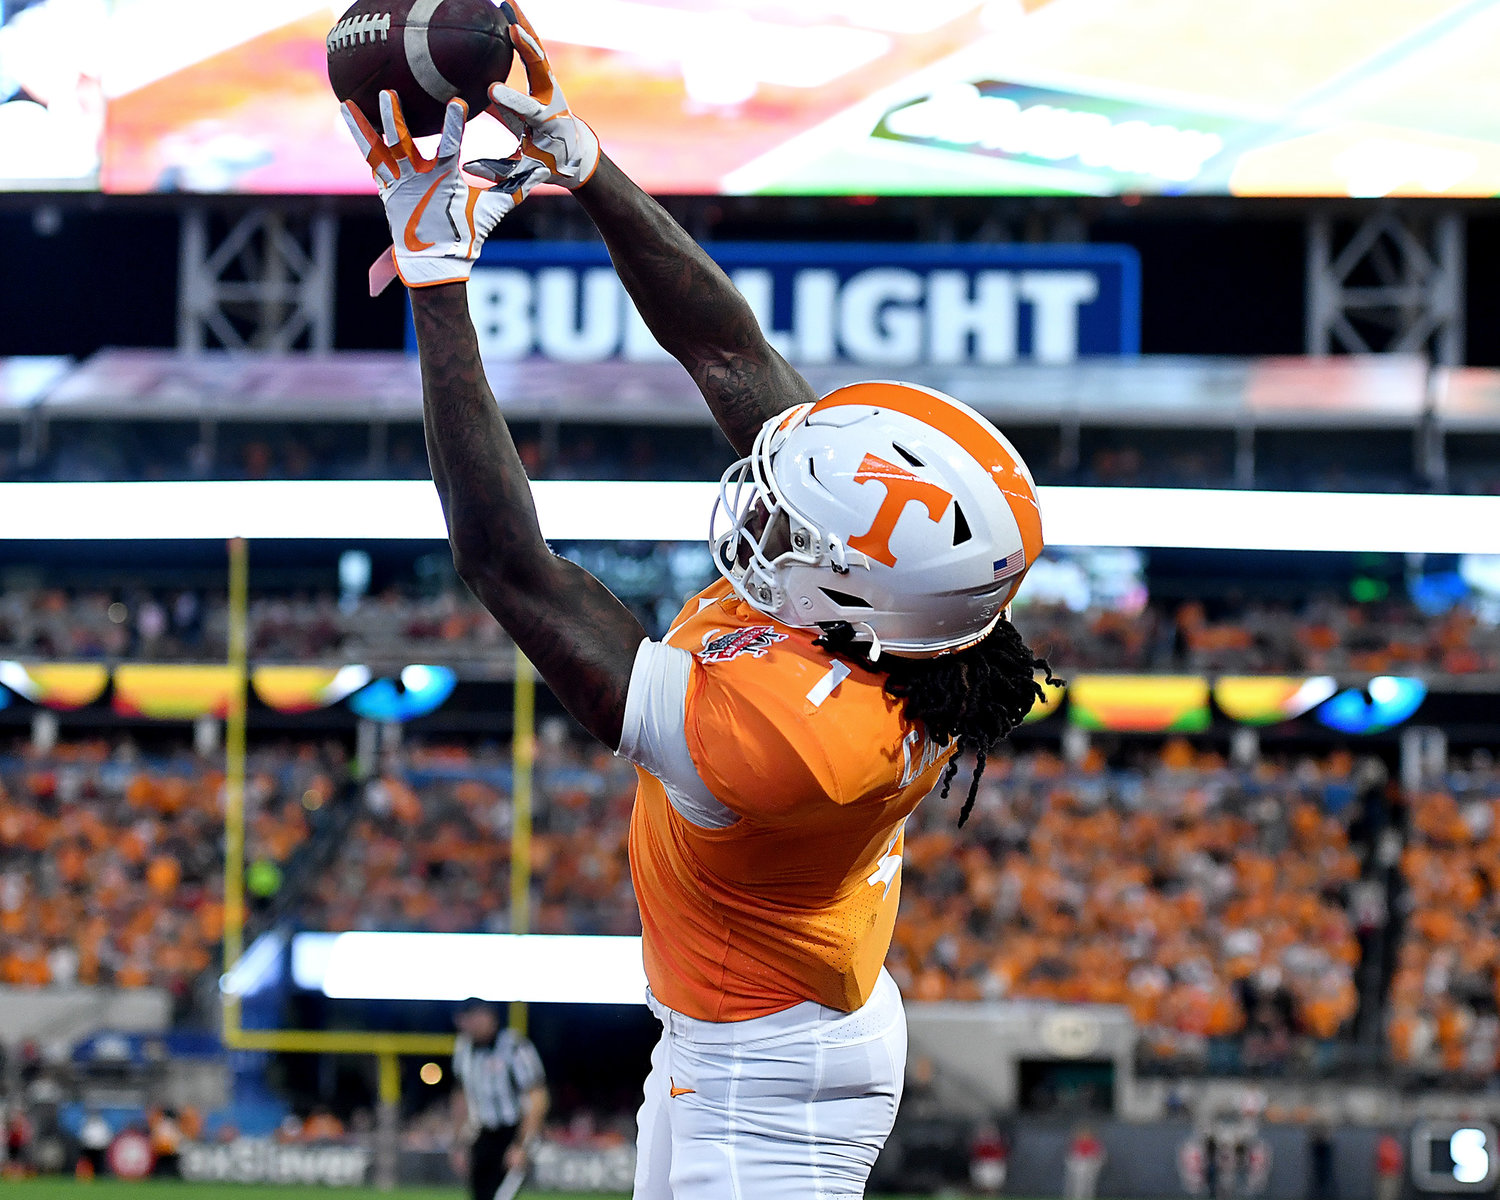 Tennessee Volunteers wide receiver Marquez Callaway (1) reaches for a pass in the end zone but can't quite get it during the first half of the Gator Bowl NCAA football game against the Indiana Hoosiers Thursday, January 2, 2020, at TIAA Bank Field in Jacksonville, Fla.